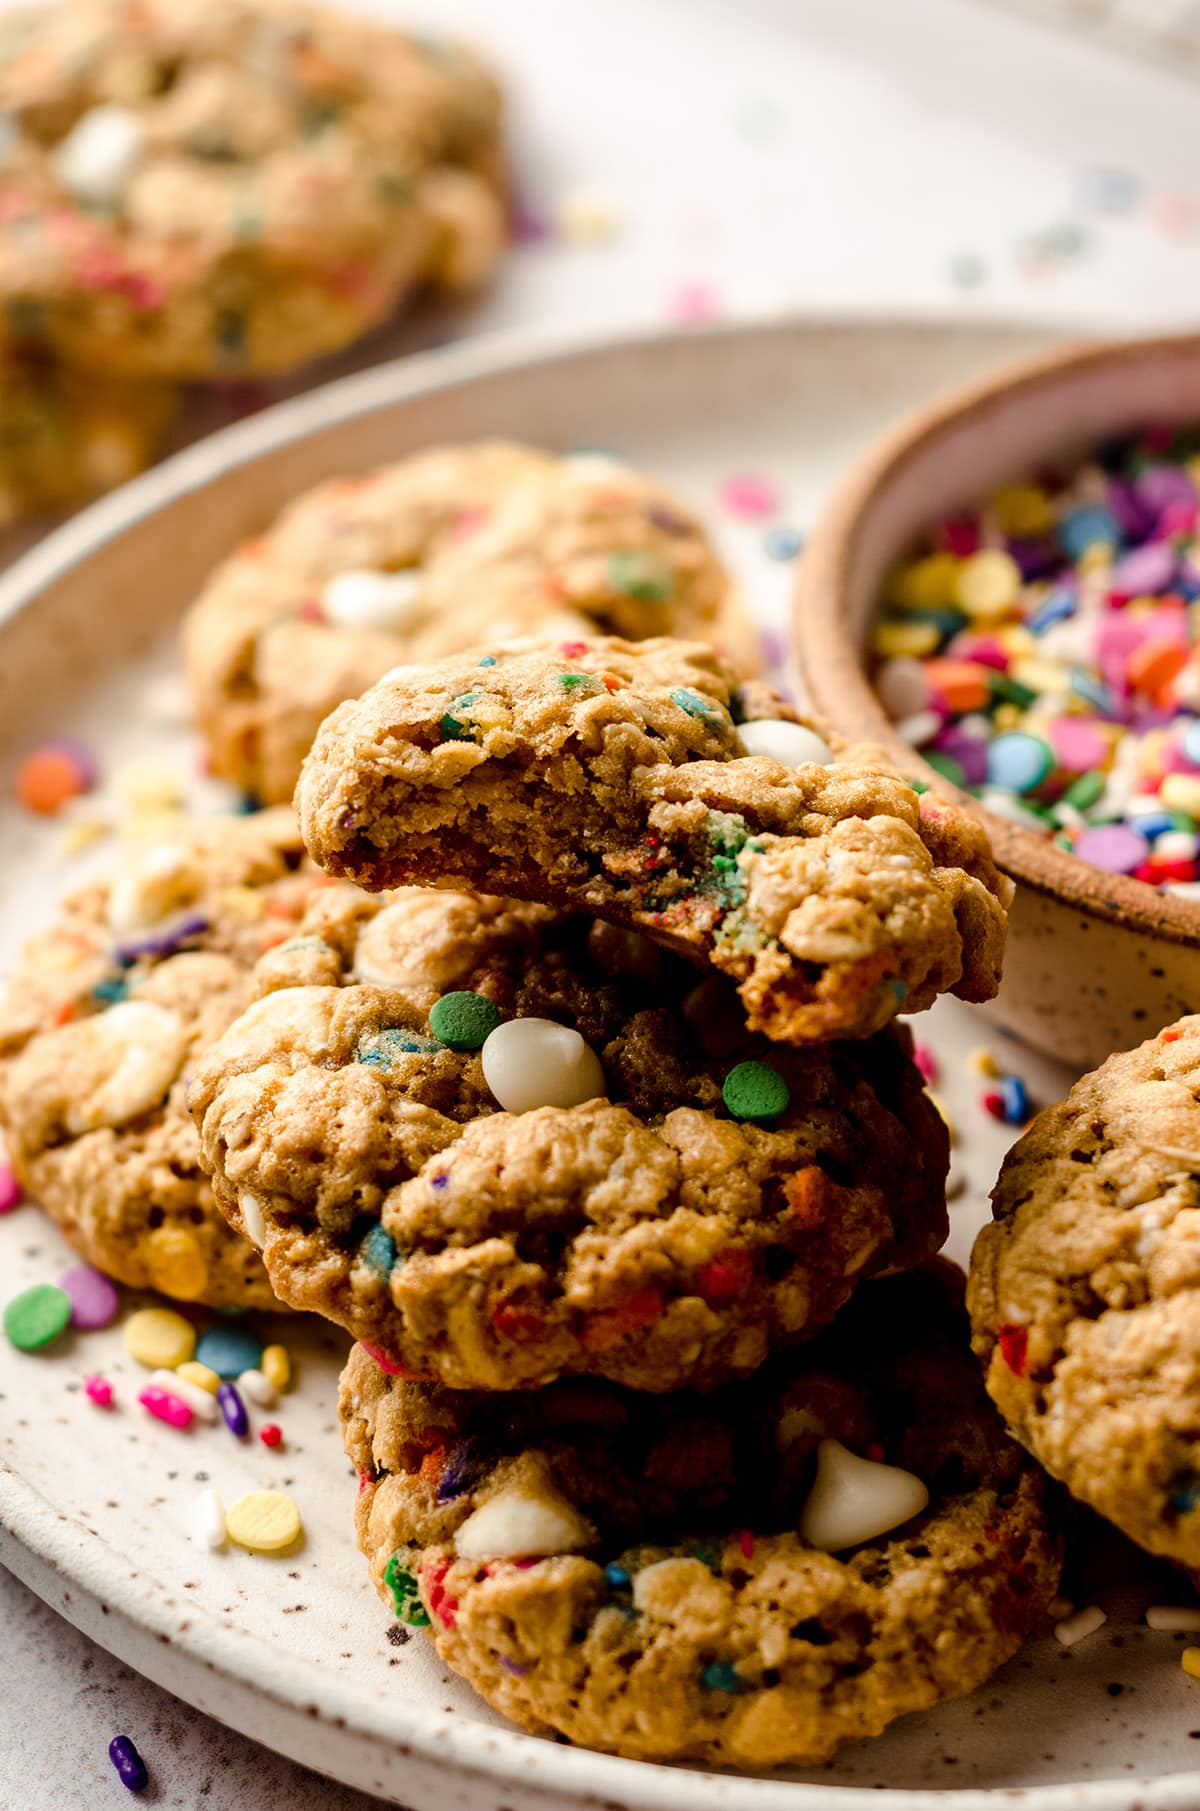 funfetti oatmeal cookies on a plate with a bowl of sprinkles and one cookie has a bite taken out of it